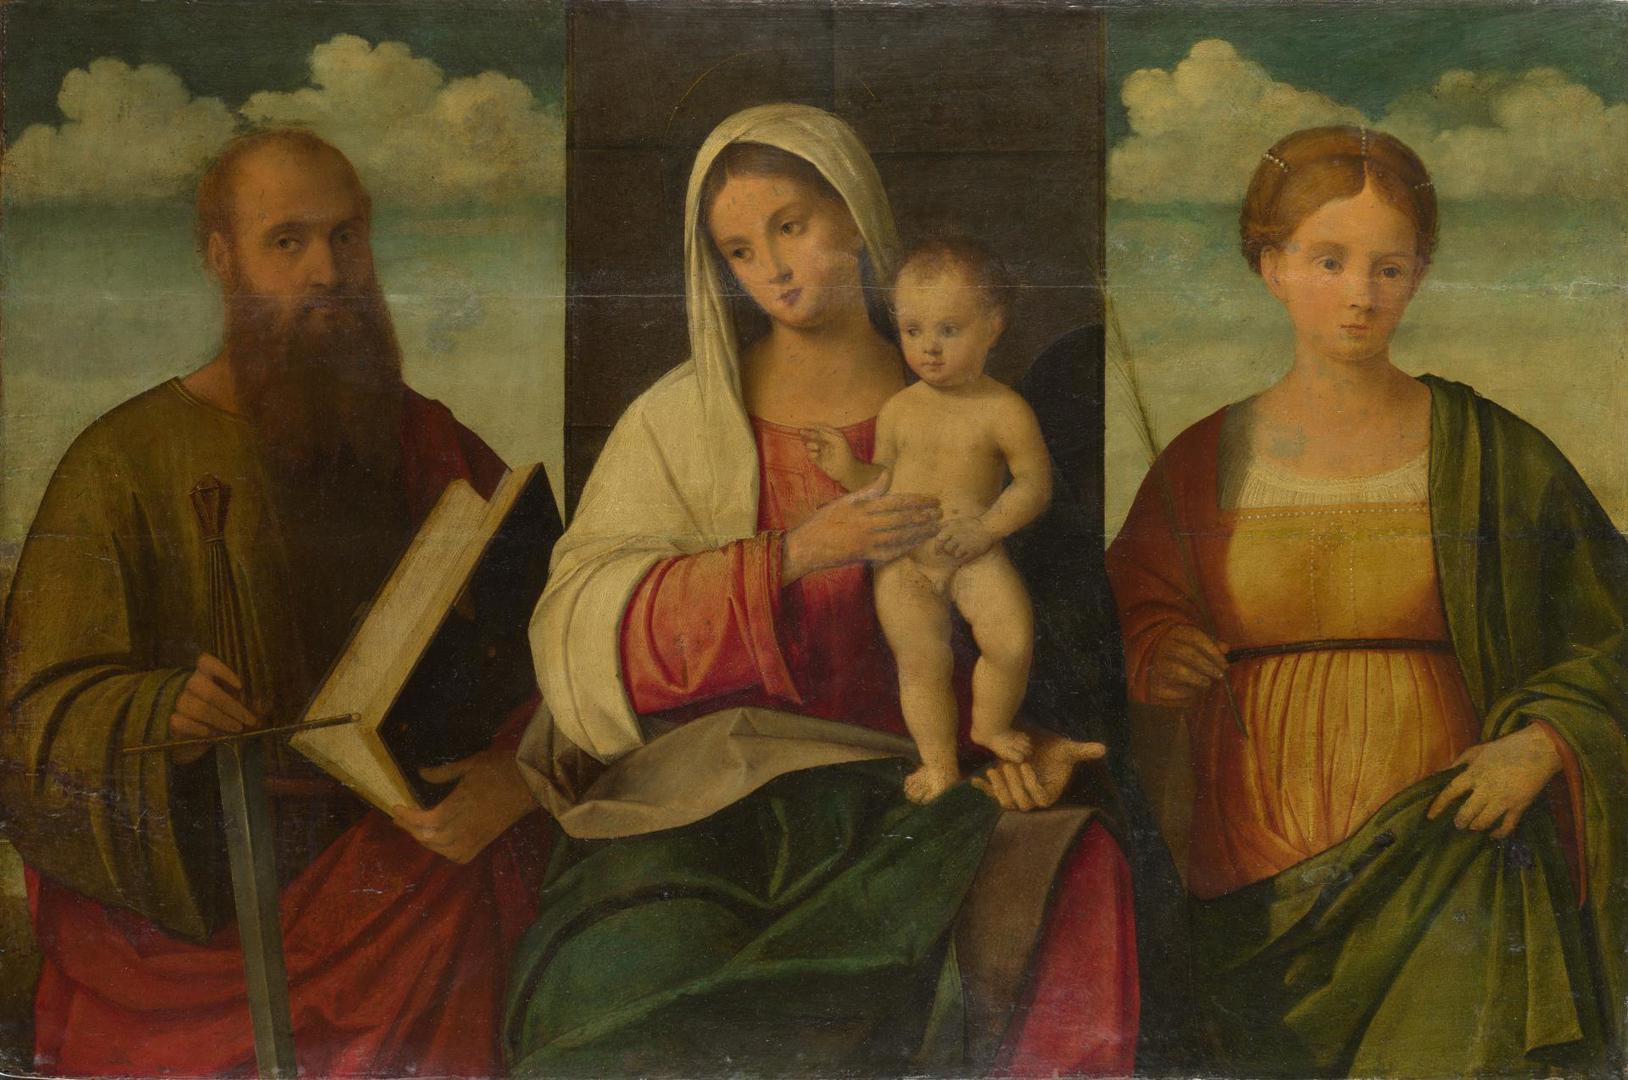 The Virgin and Child and Saints by Francesco Bissolo